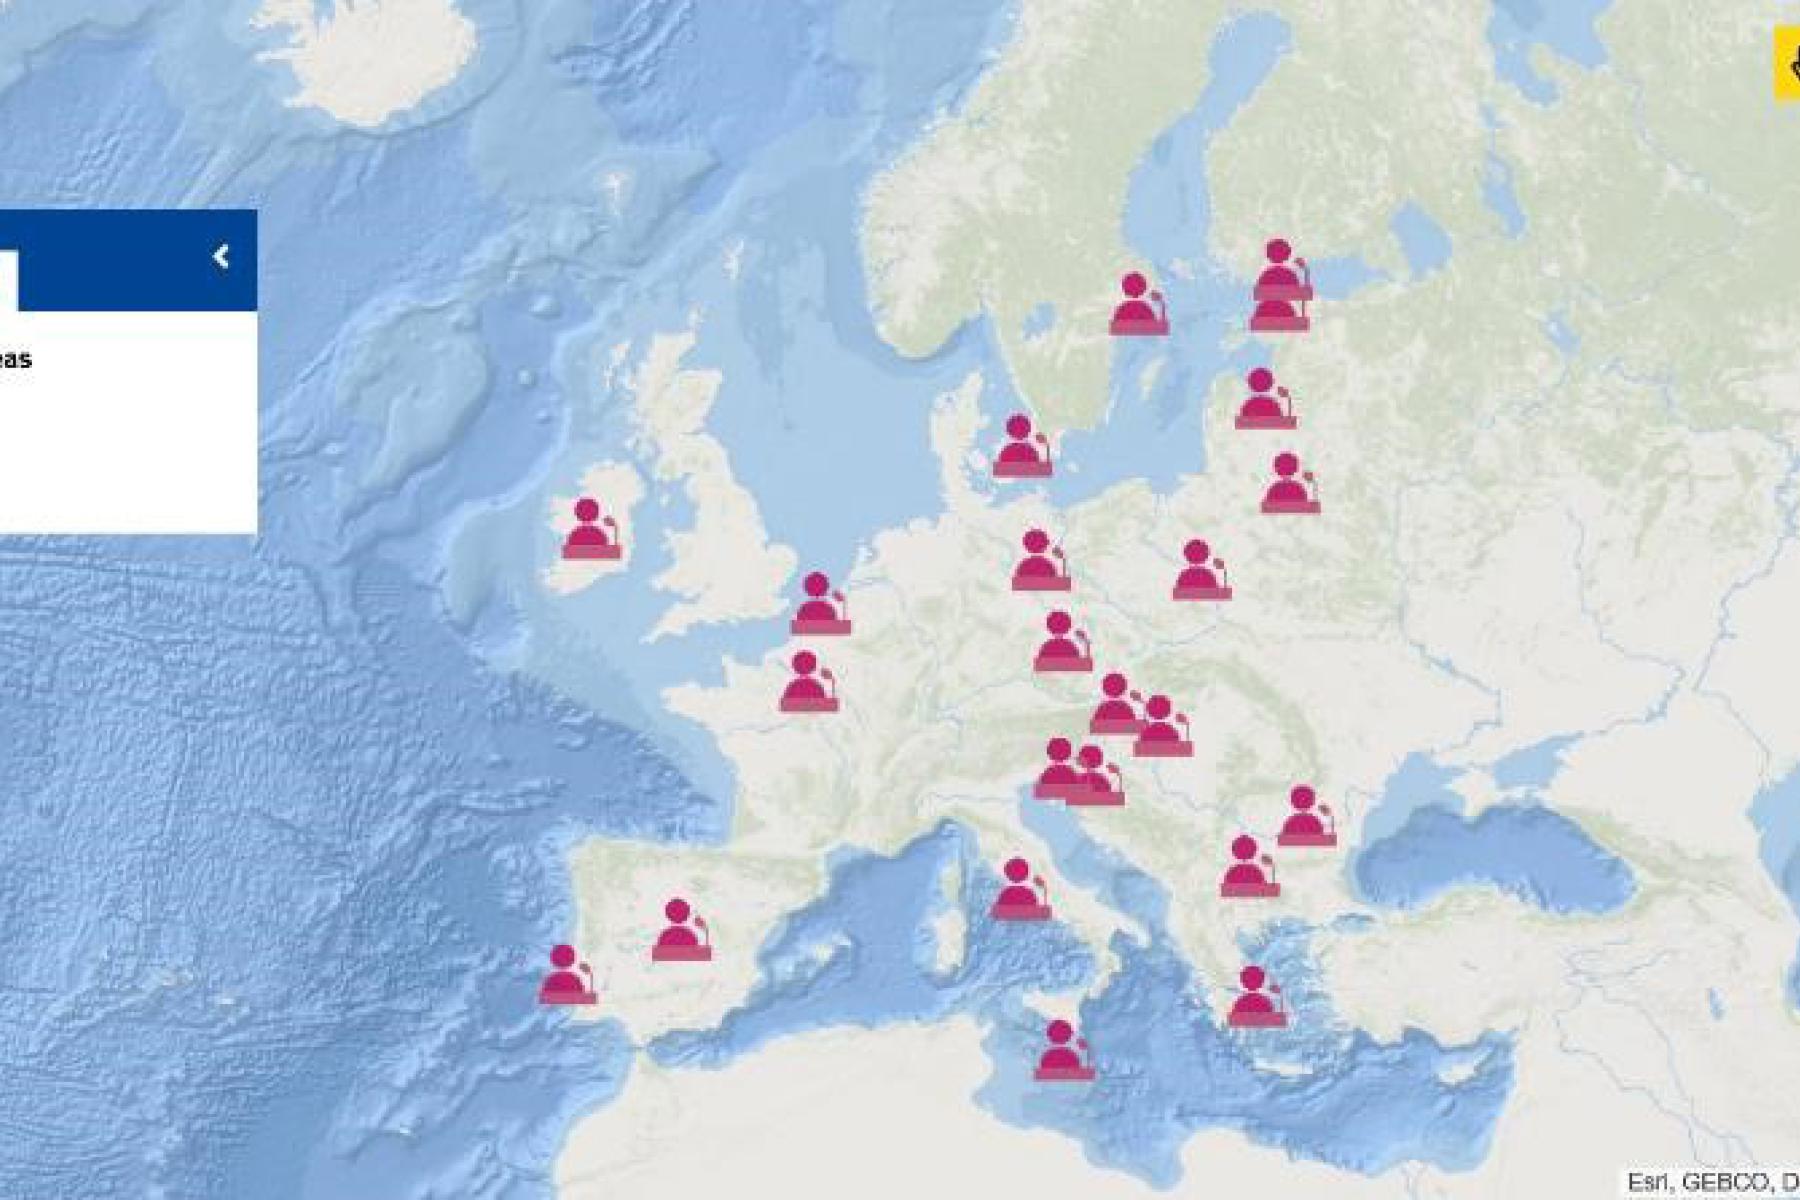 The Map of the Week shows the 24 European Atlas of the Seas Ambassadors.